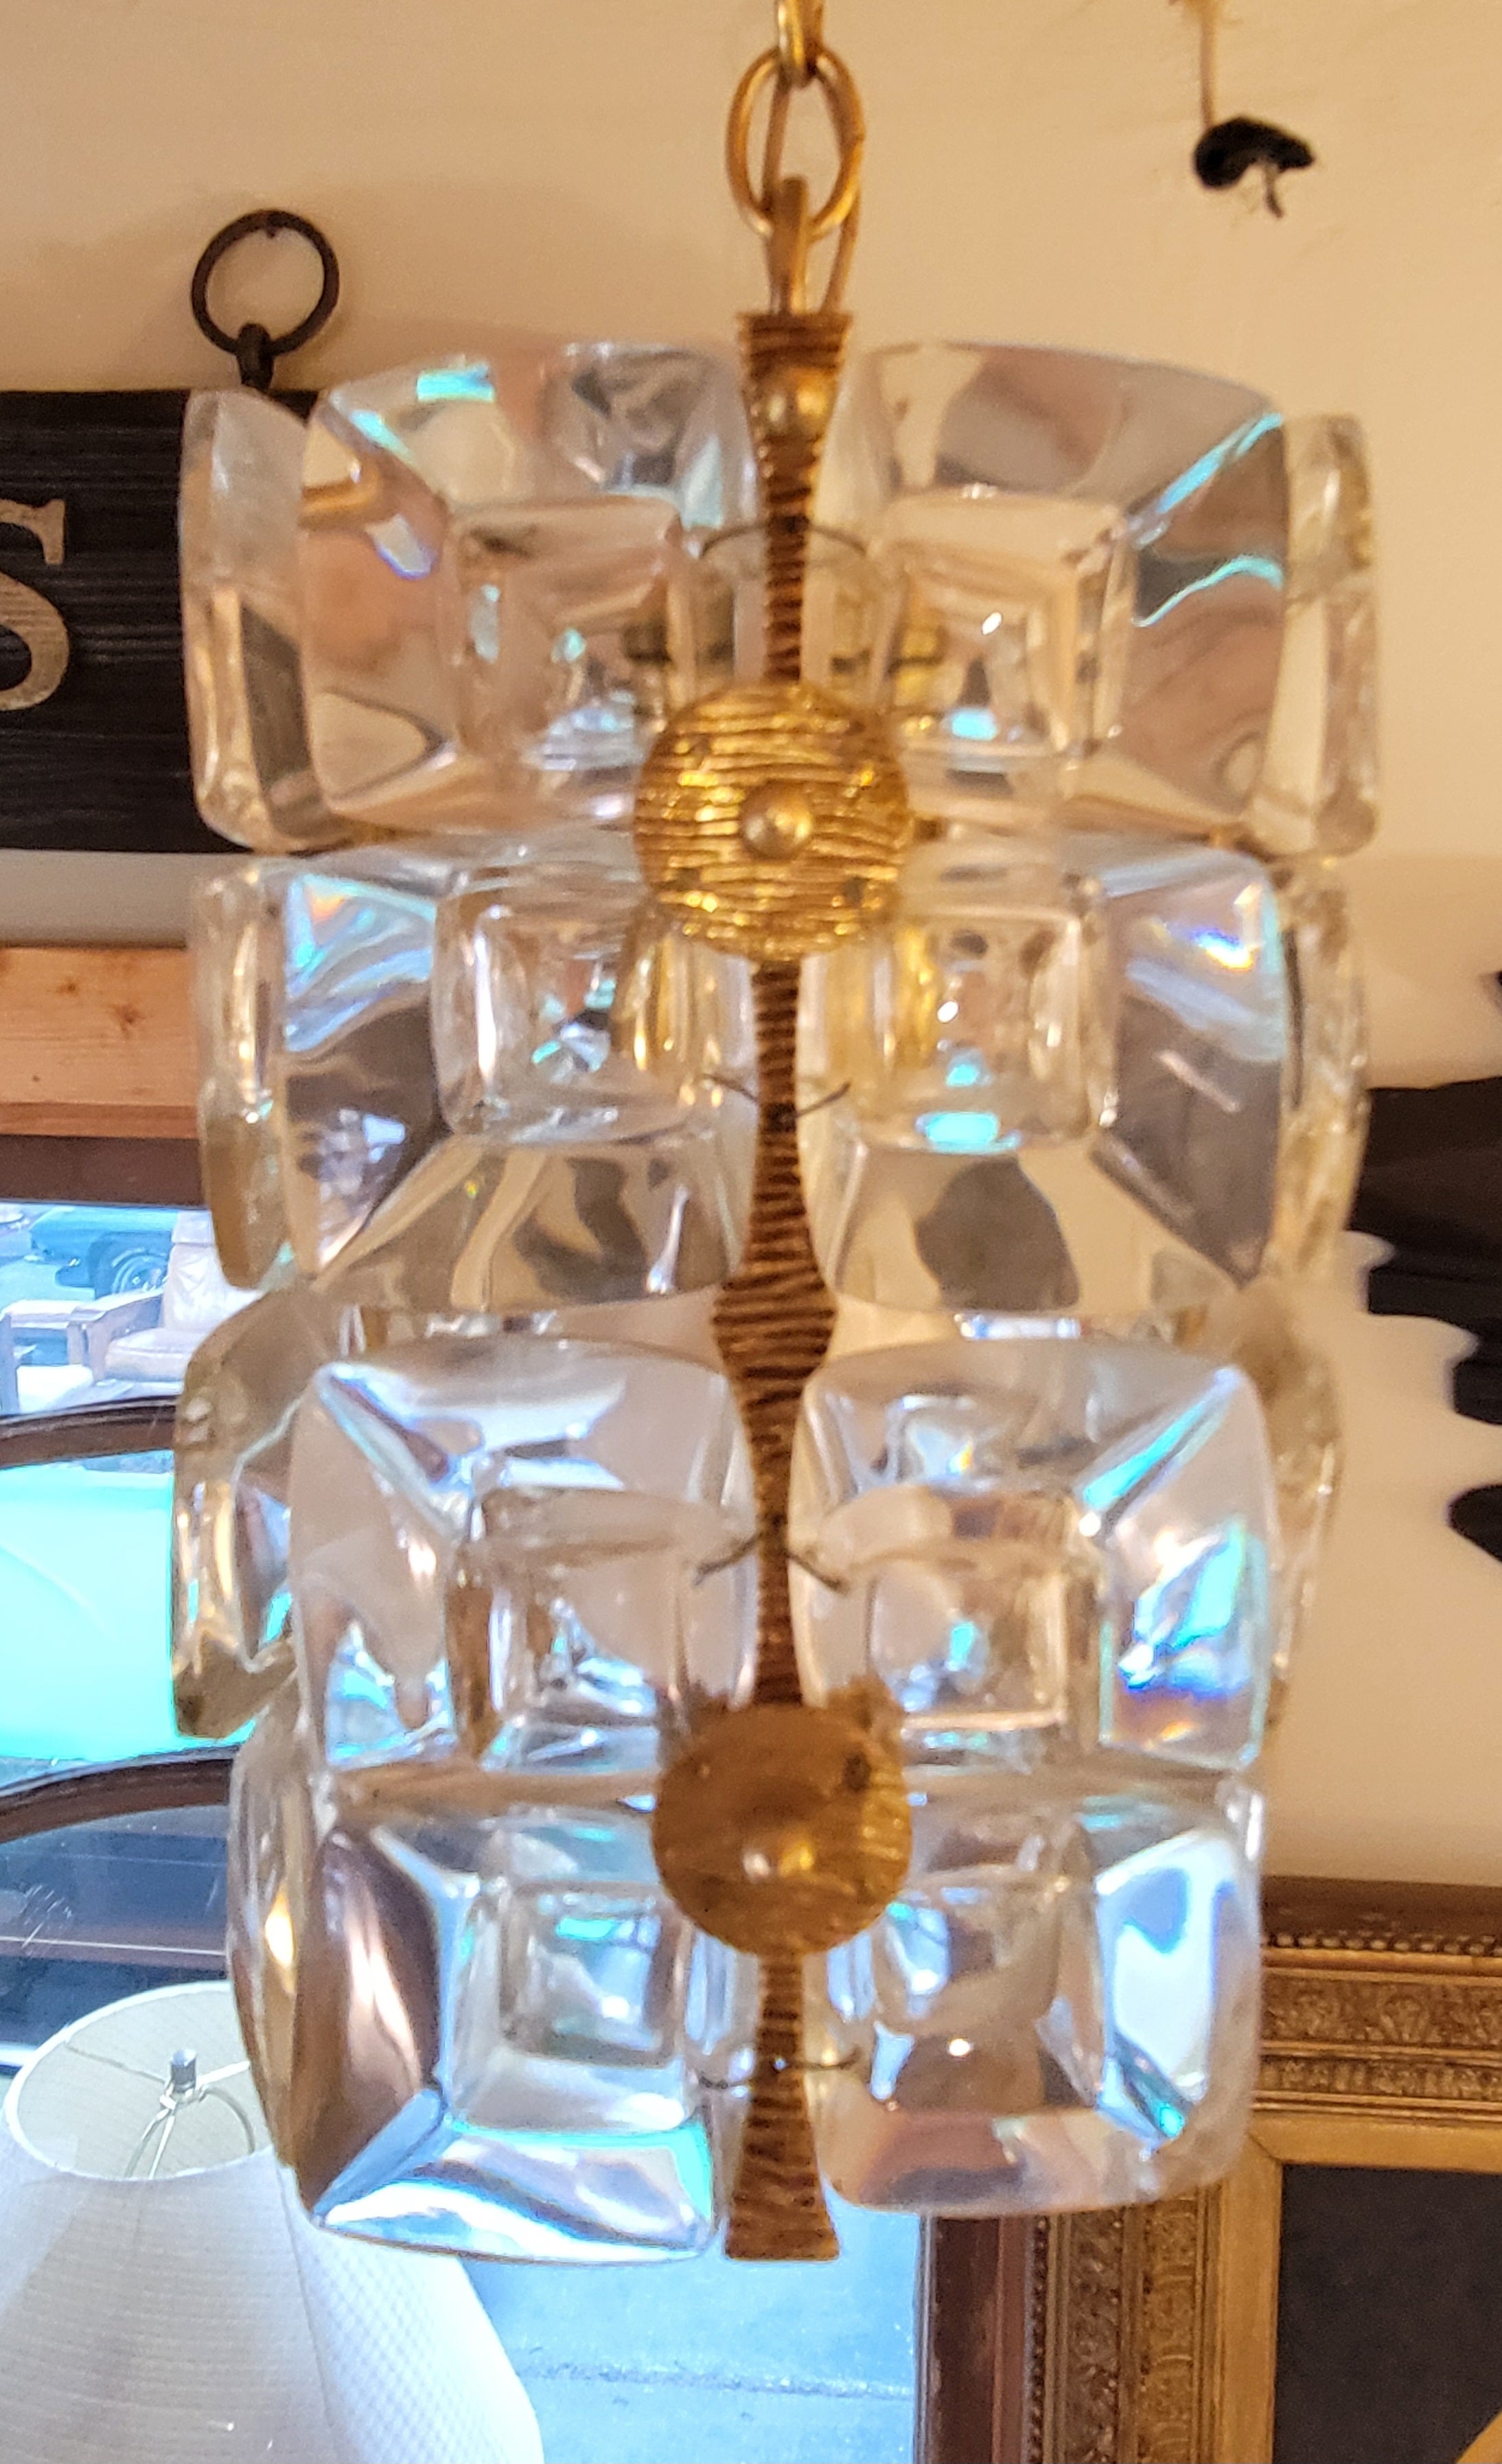 Rectangular crystal and gilt brass pendant ceiling light designed by Gaetano Sciolari for Palwa. Germany, circa. 1970. Original crystal clad escutcheon plate. Approximately 20 inches of chain. Excellent original, working condition.